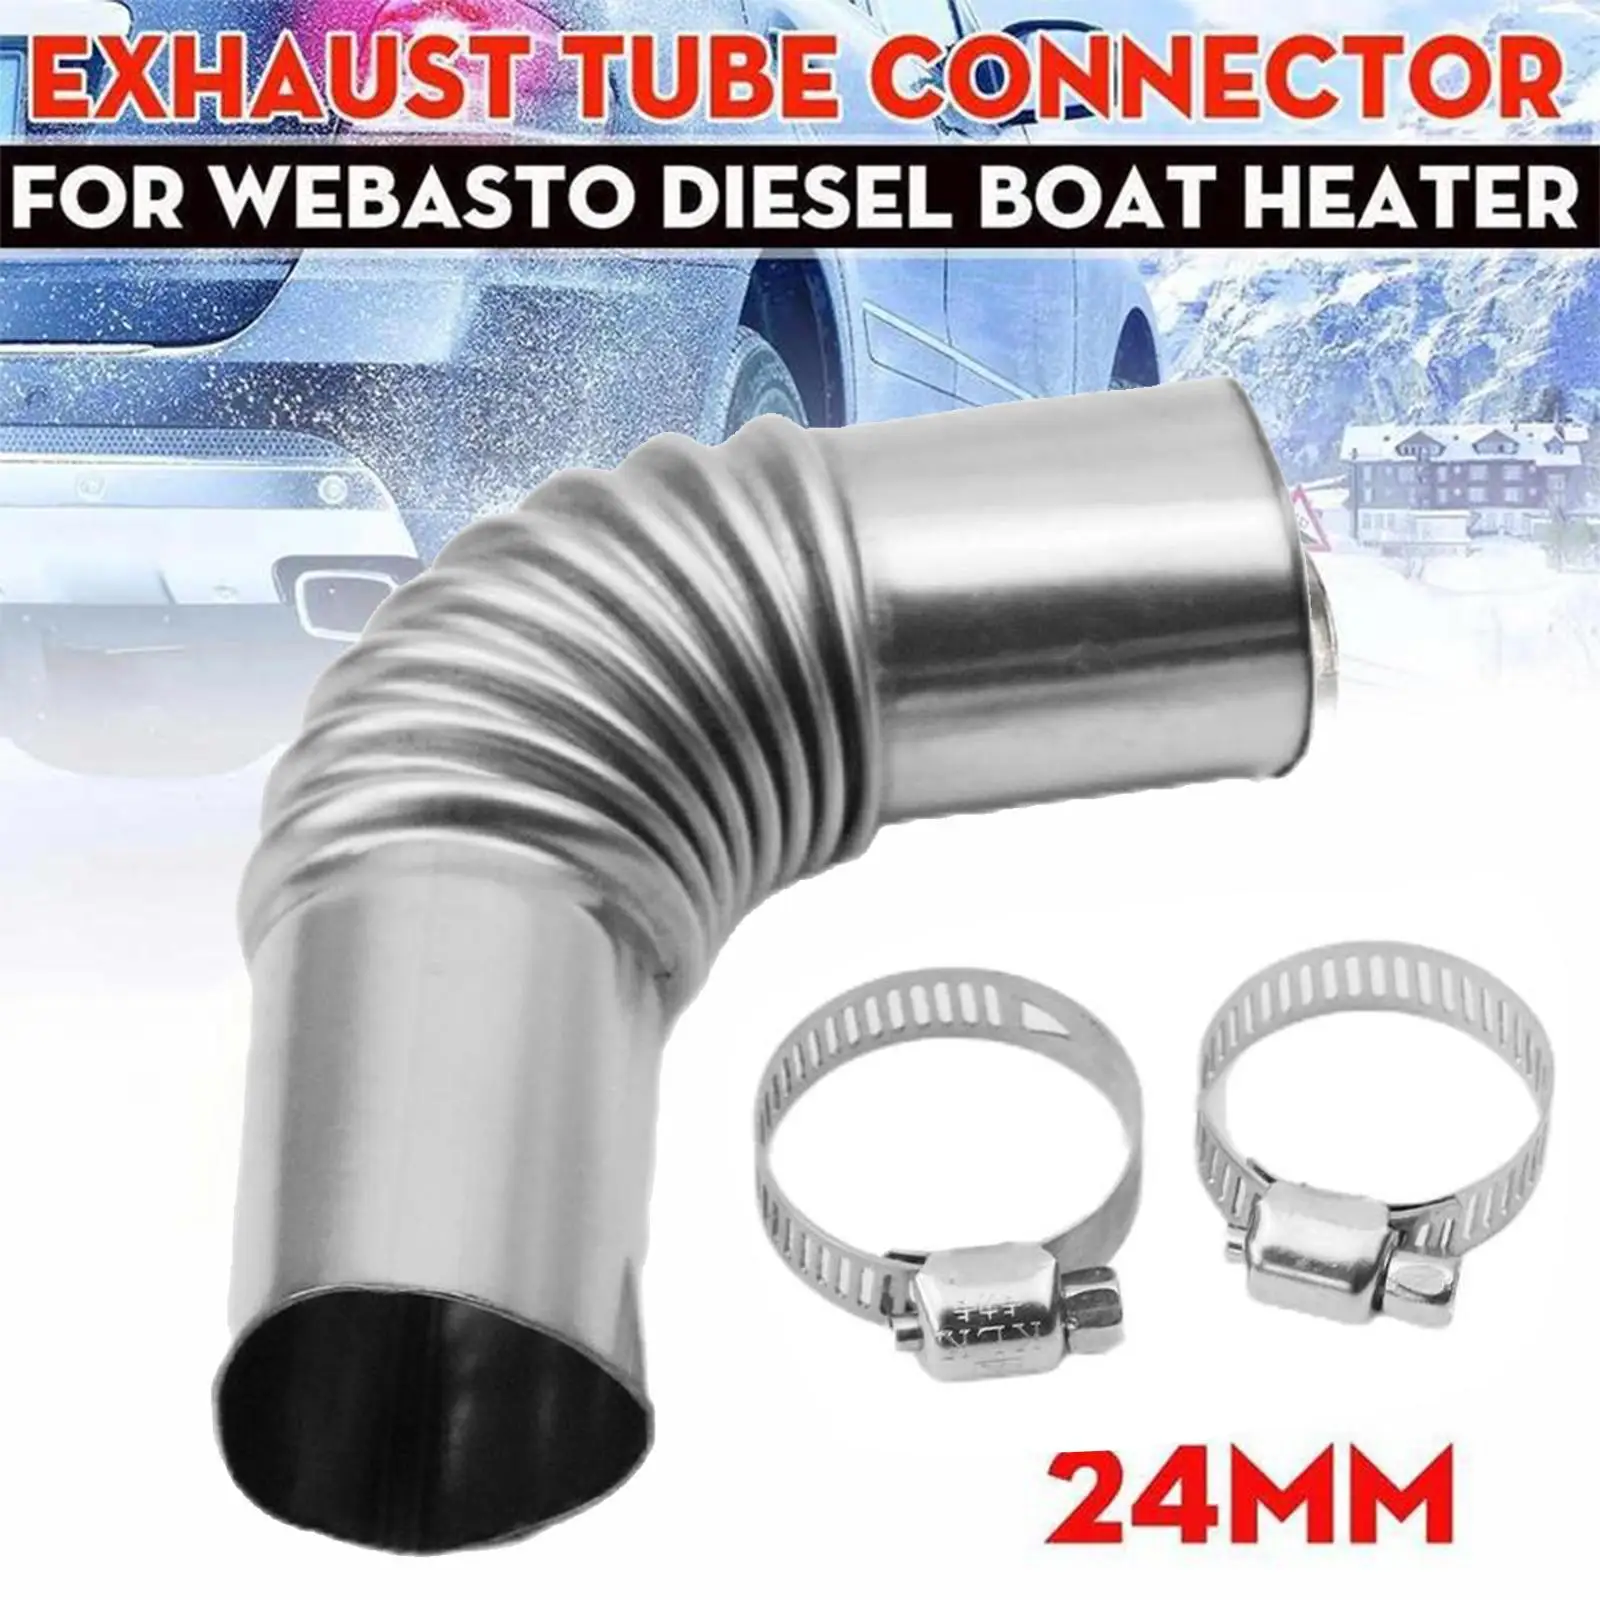 

24mm Elbow Exhaust Pipe Joint Tube Connector With Clamps For Eberspacher For Webasto Boat Heater Car Heating Parts